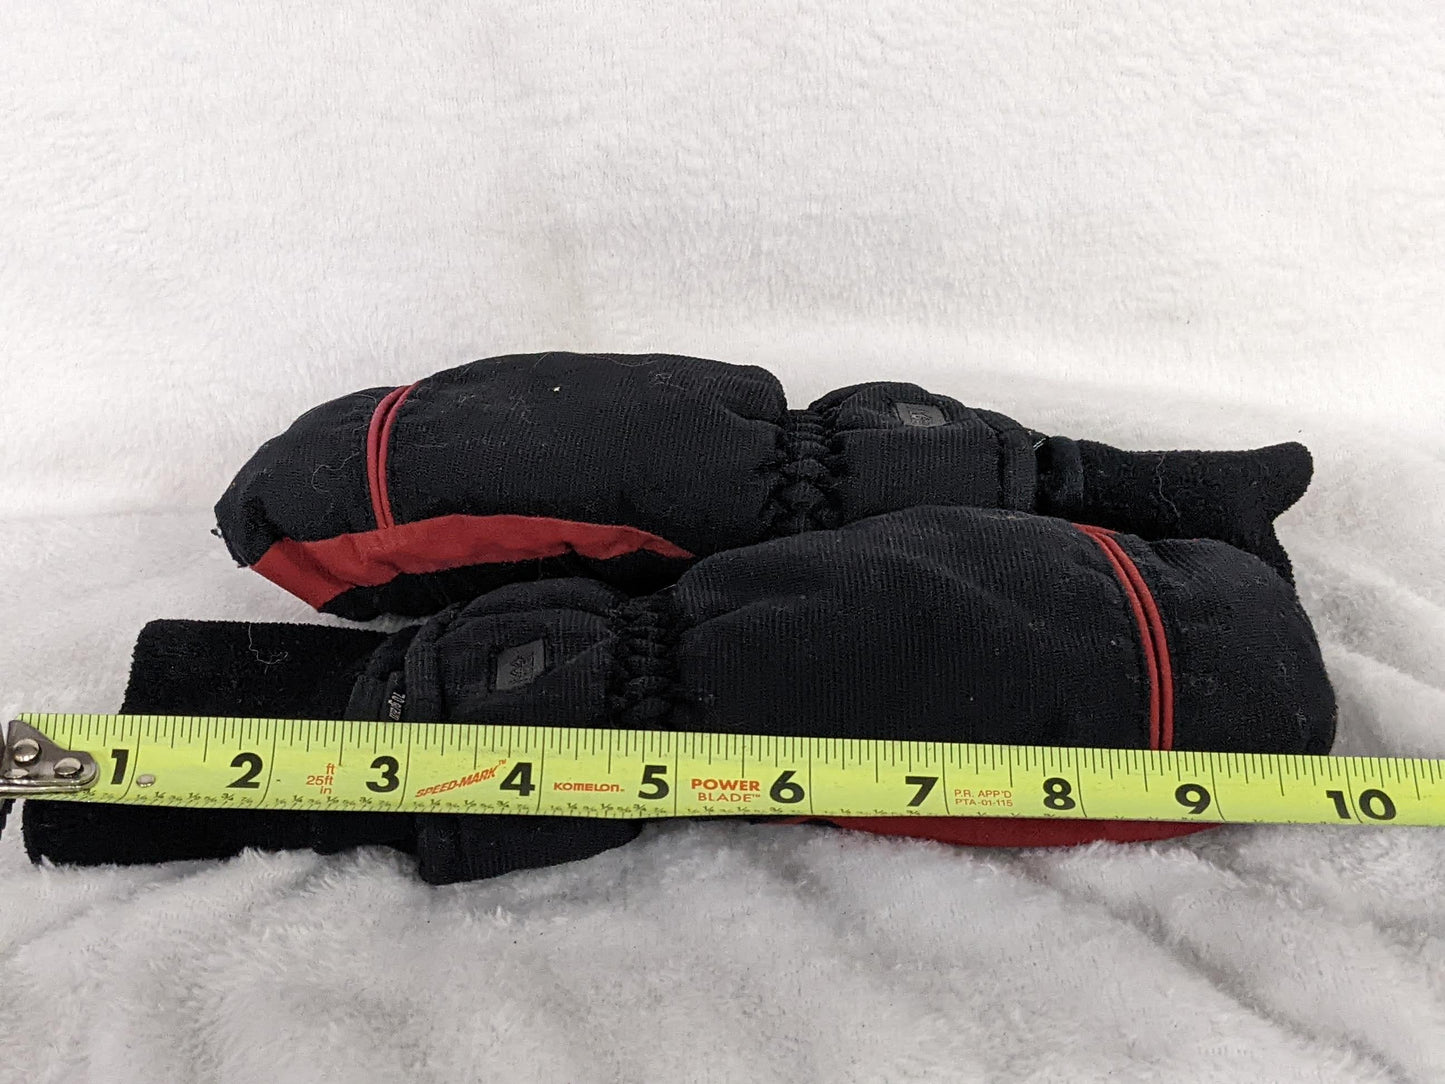 REI Youth Winter Mittens Size Youth Medium Color Black Condition Used